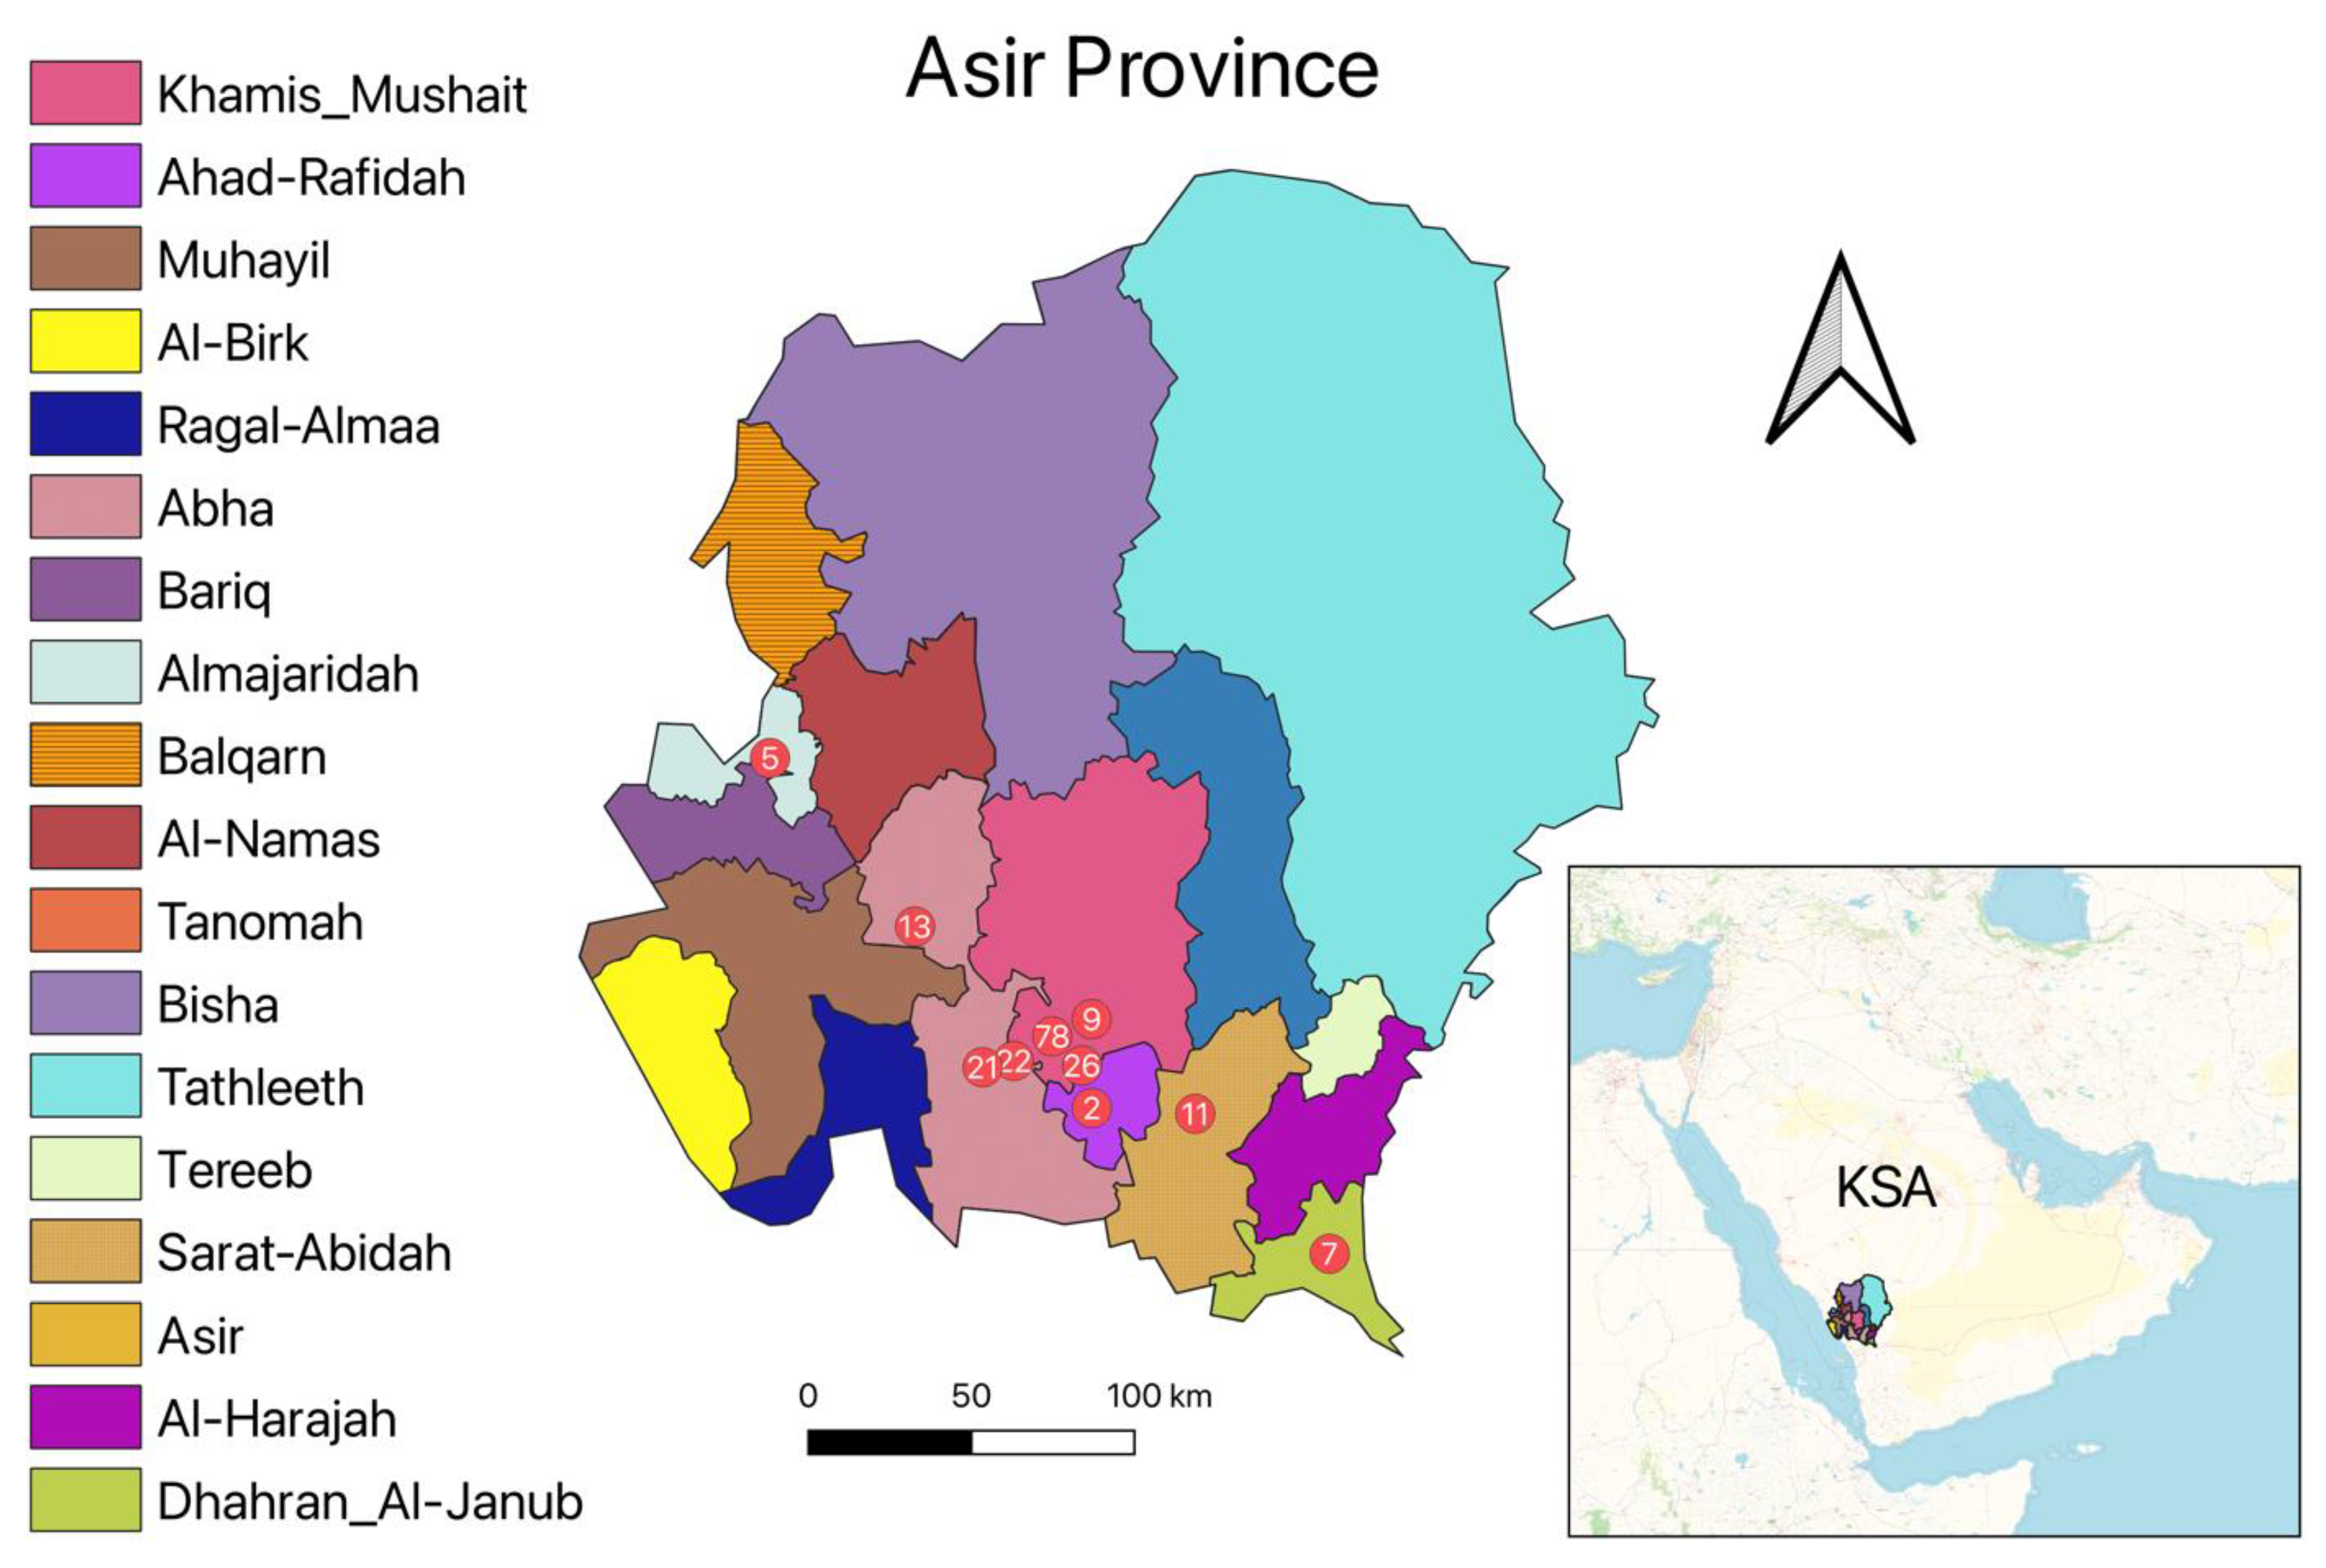 Pathogens | Free Full-Text | Molecular Characterization of Leishmania  Species among Patients with Cutaneous Leishmaniasis in Asir Province, Saudi  Arabia